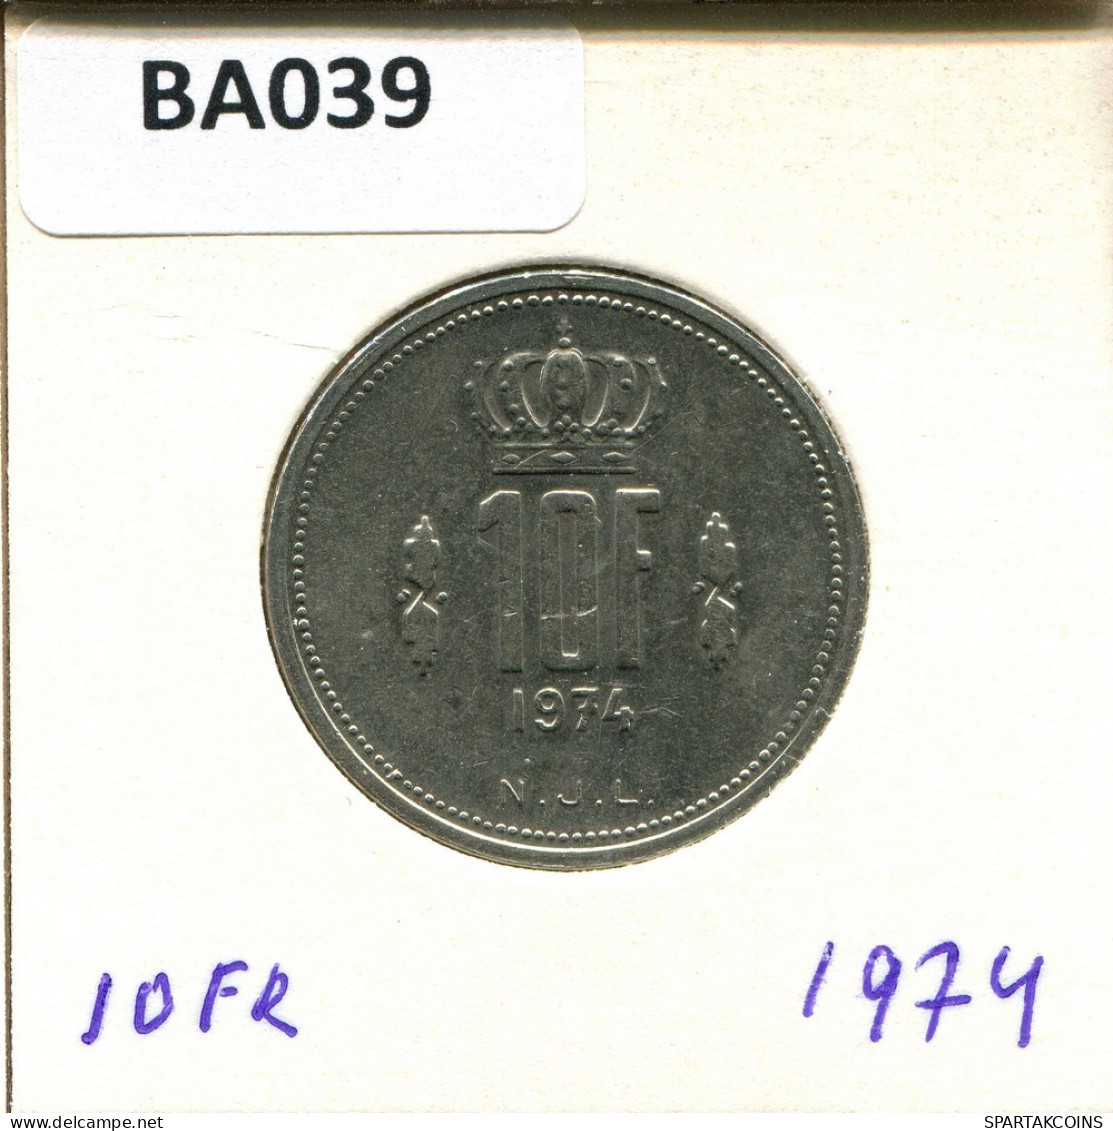 10 FRANCS 1974 LUXEMBOURG Coin #BA039.U.A - Luxemburgo